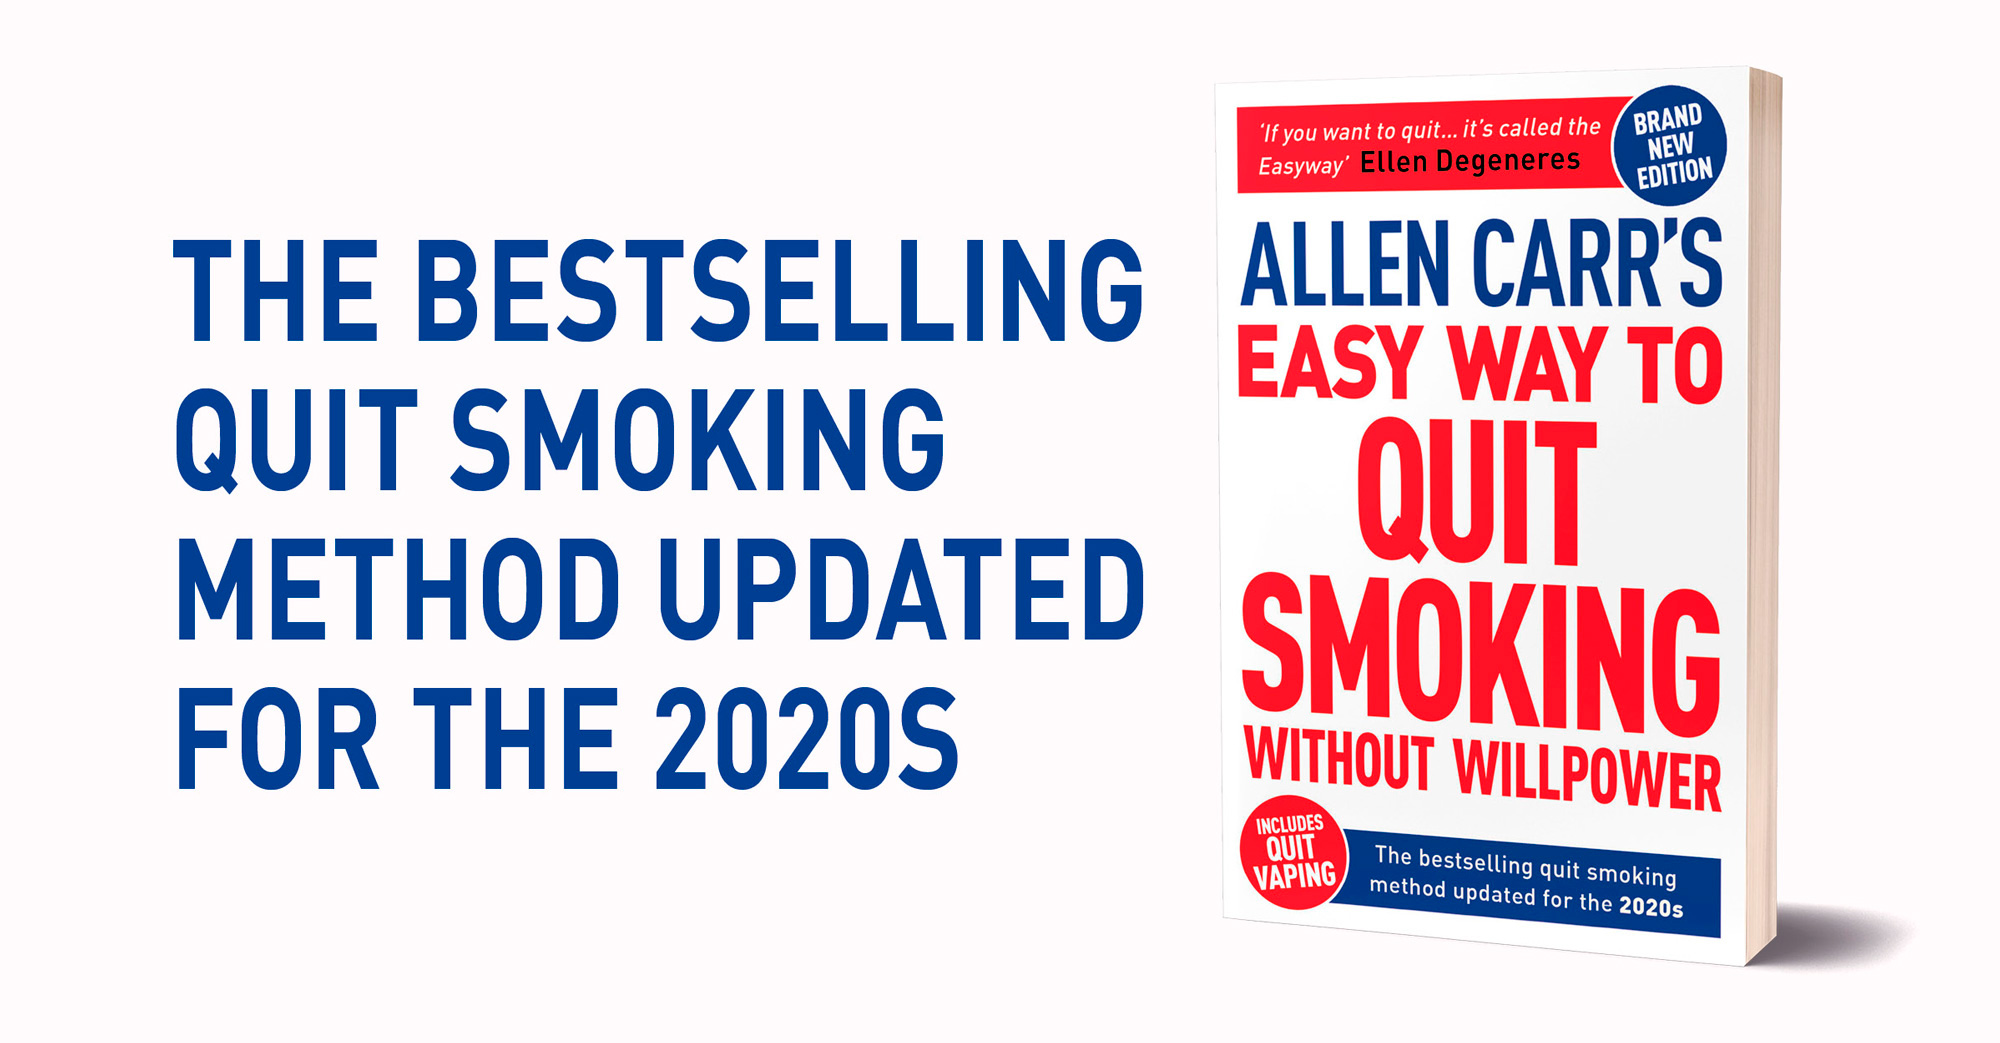 The Bestselling quit smoking method updated for the 2020s